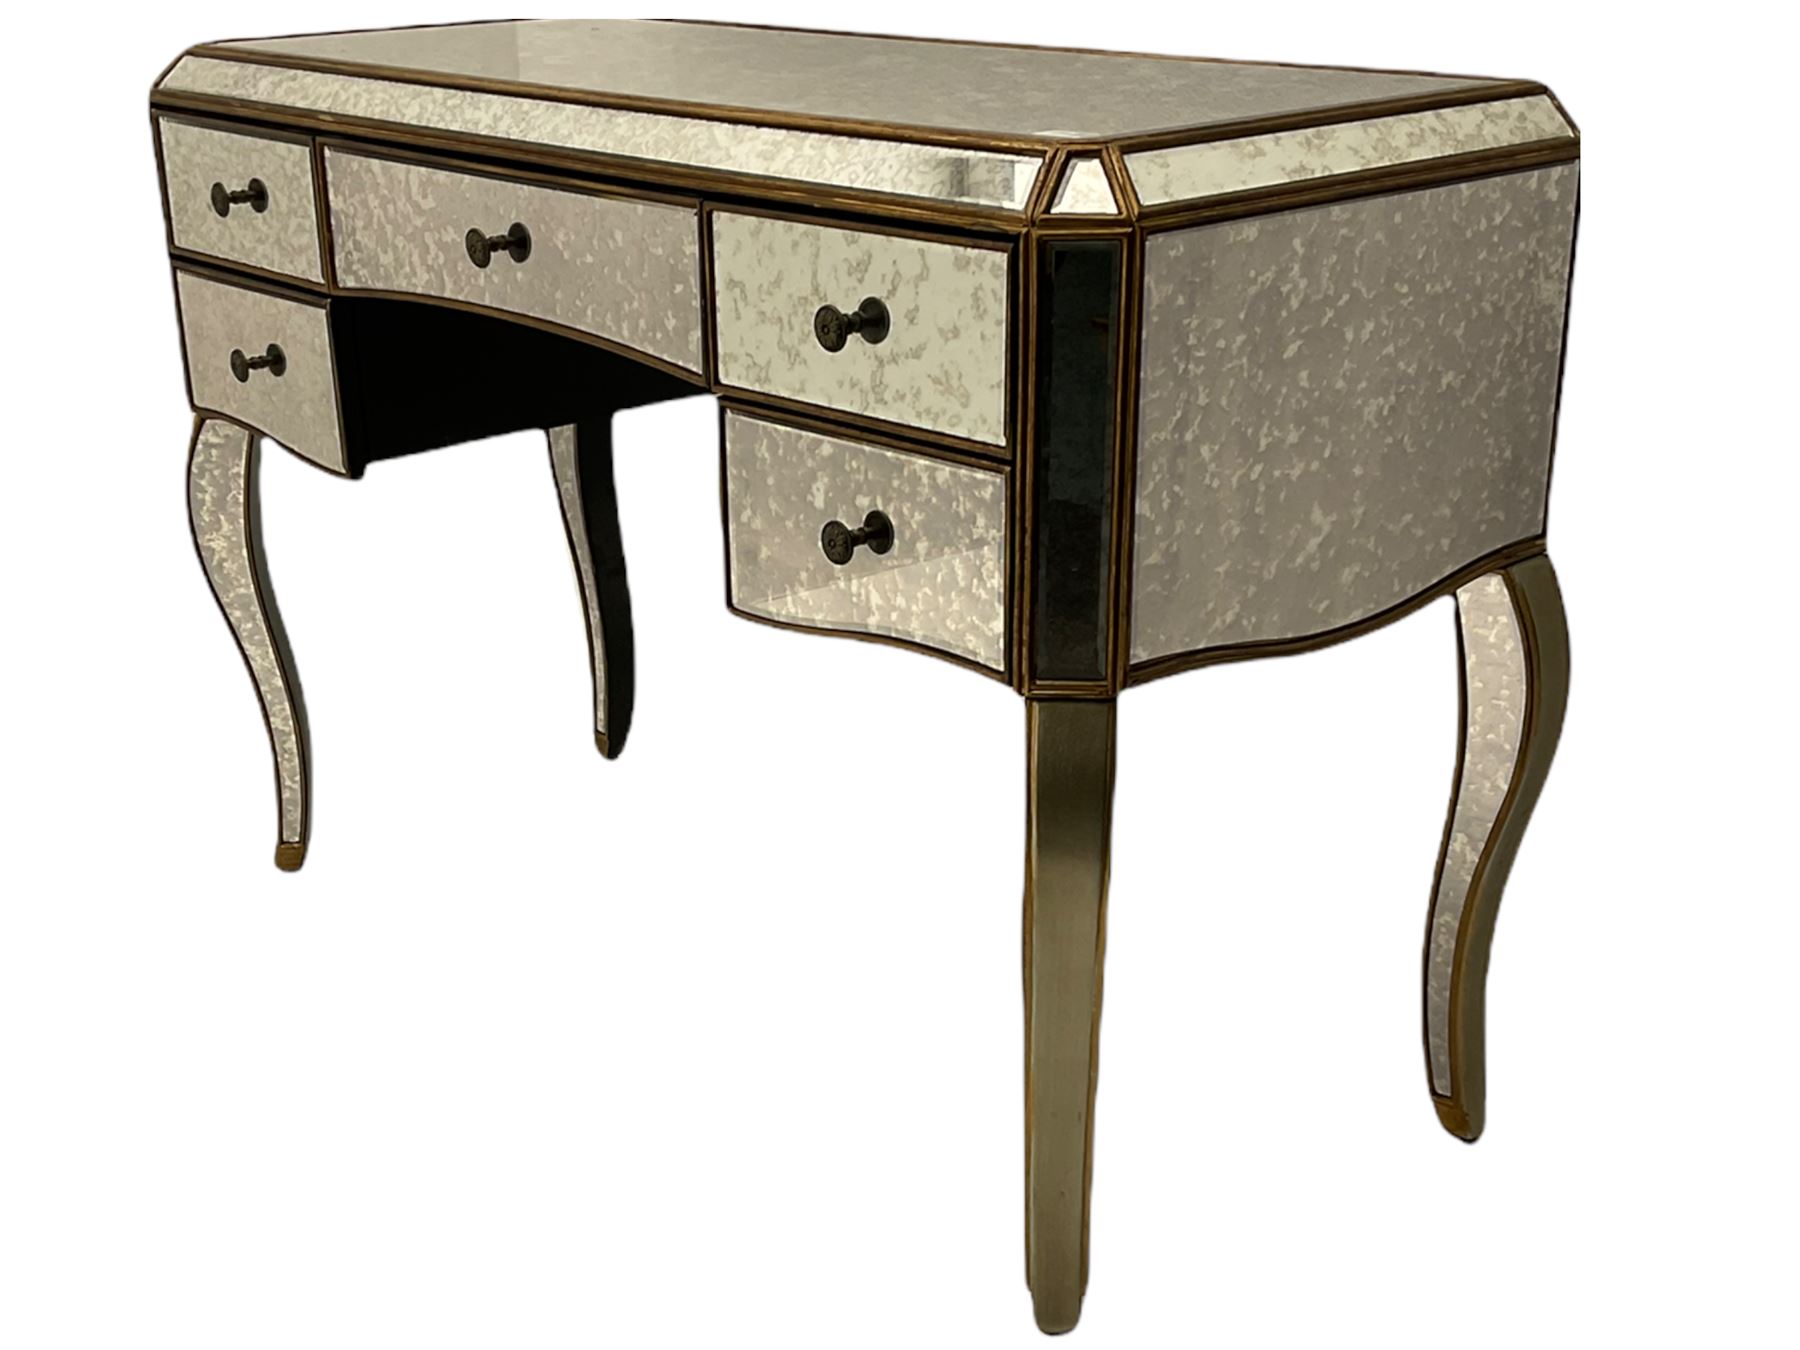 Contemporary mirrored dressing table - Image 3 of 8